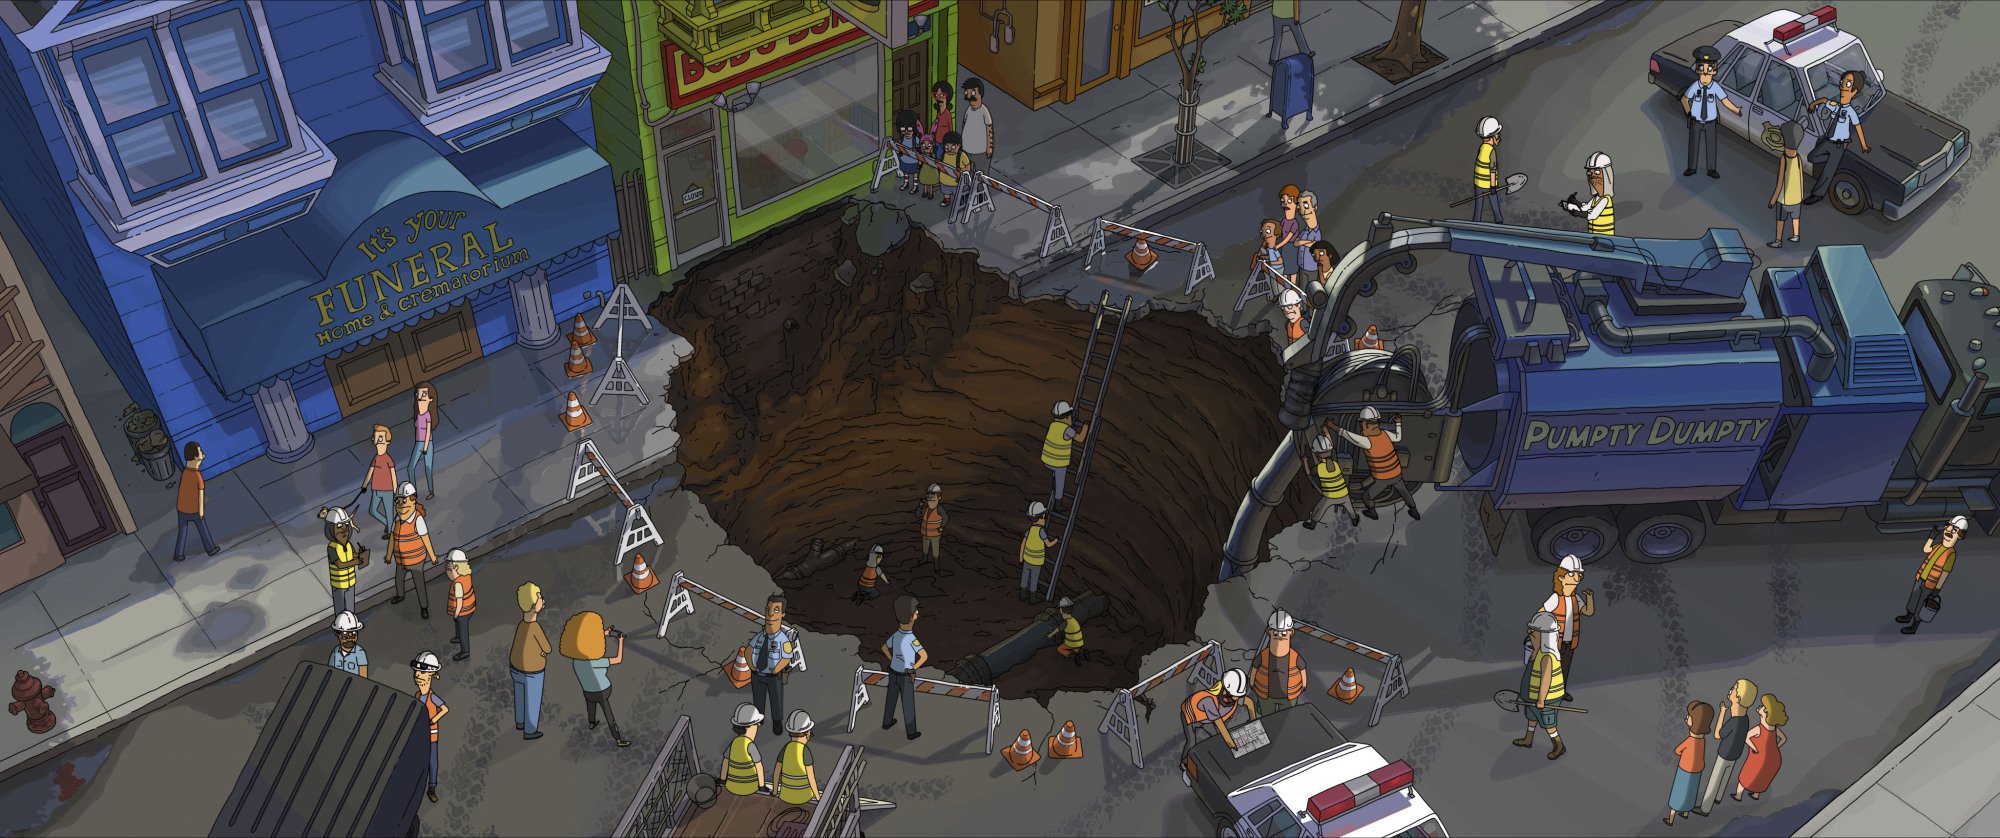 A  crowd gathers around a sinkhole in the middle of a street.